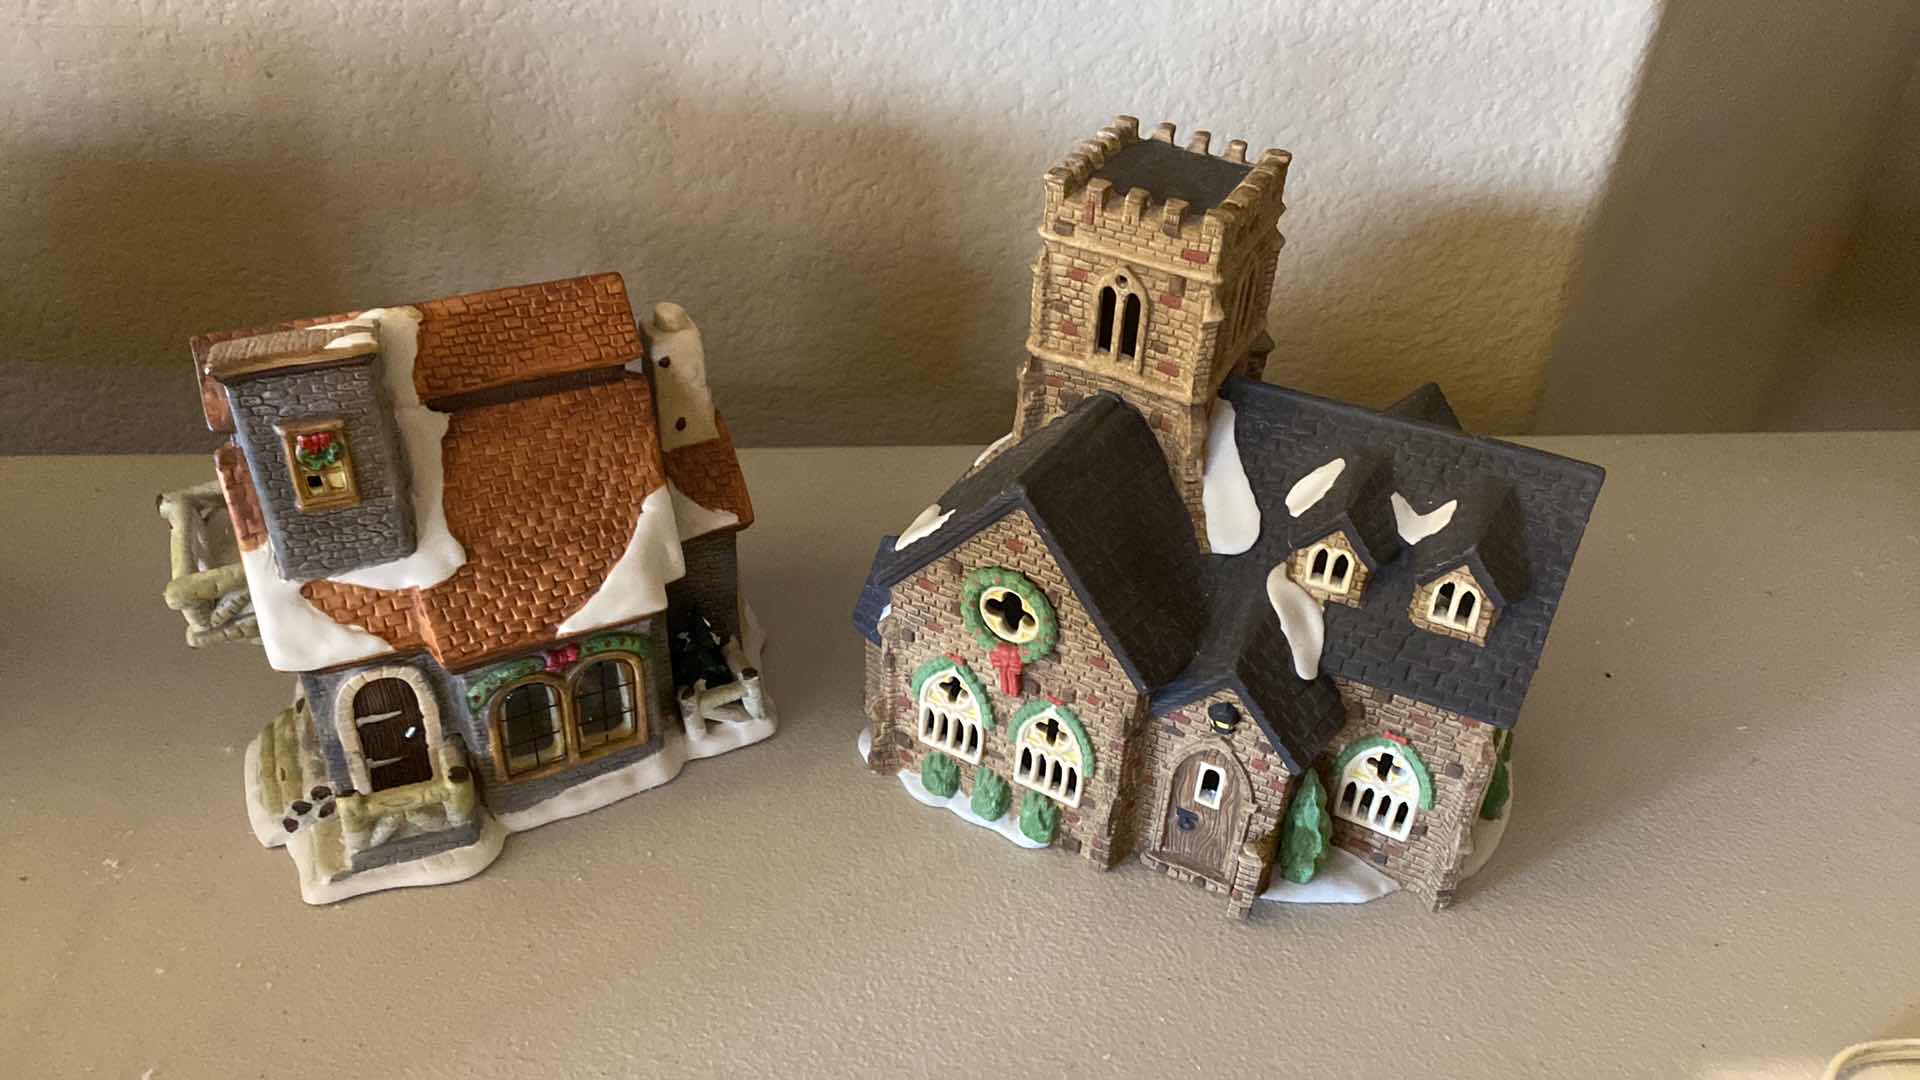 Photo 1 of 1989 DEPT 56 DICKENS VILLAGE KNOTTINGHILL CHURCH AND LR BRAND VILLAGE HOUSE (INCLUDES CORDS)